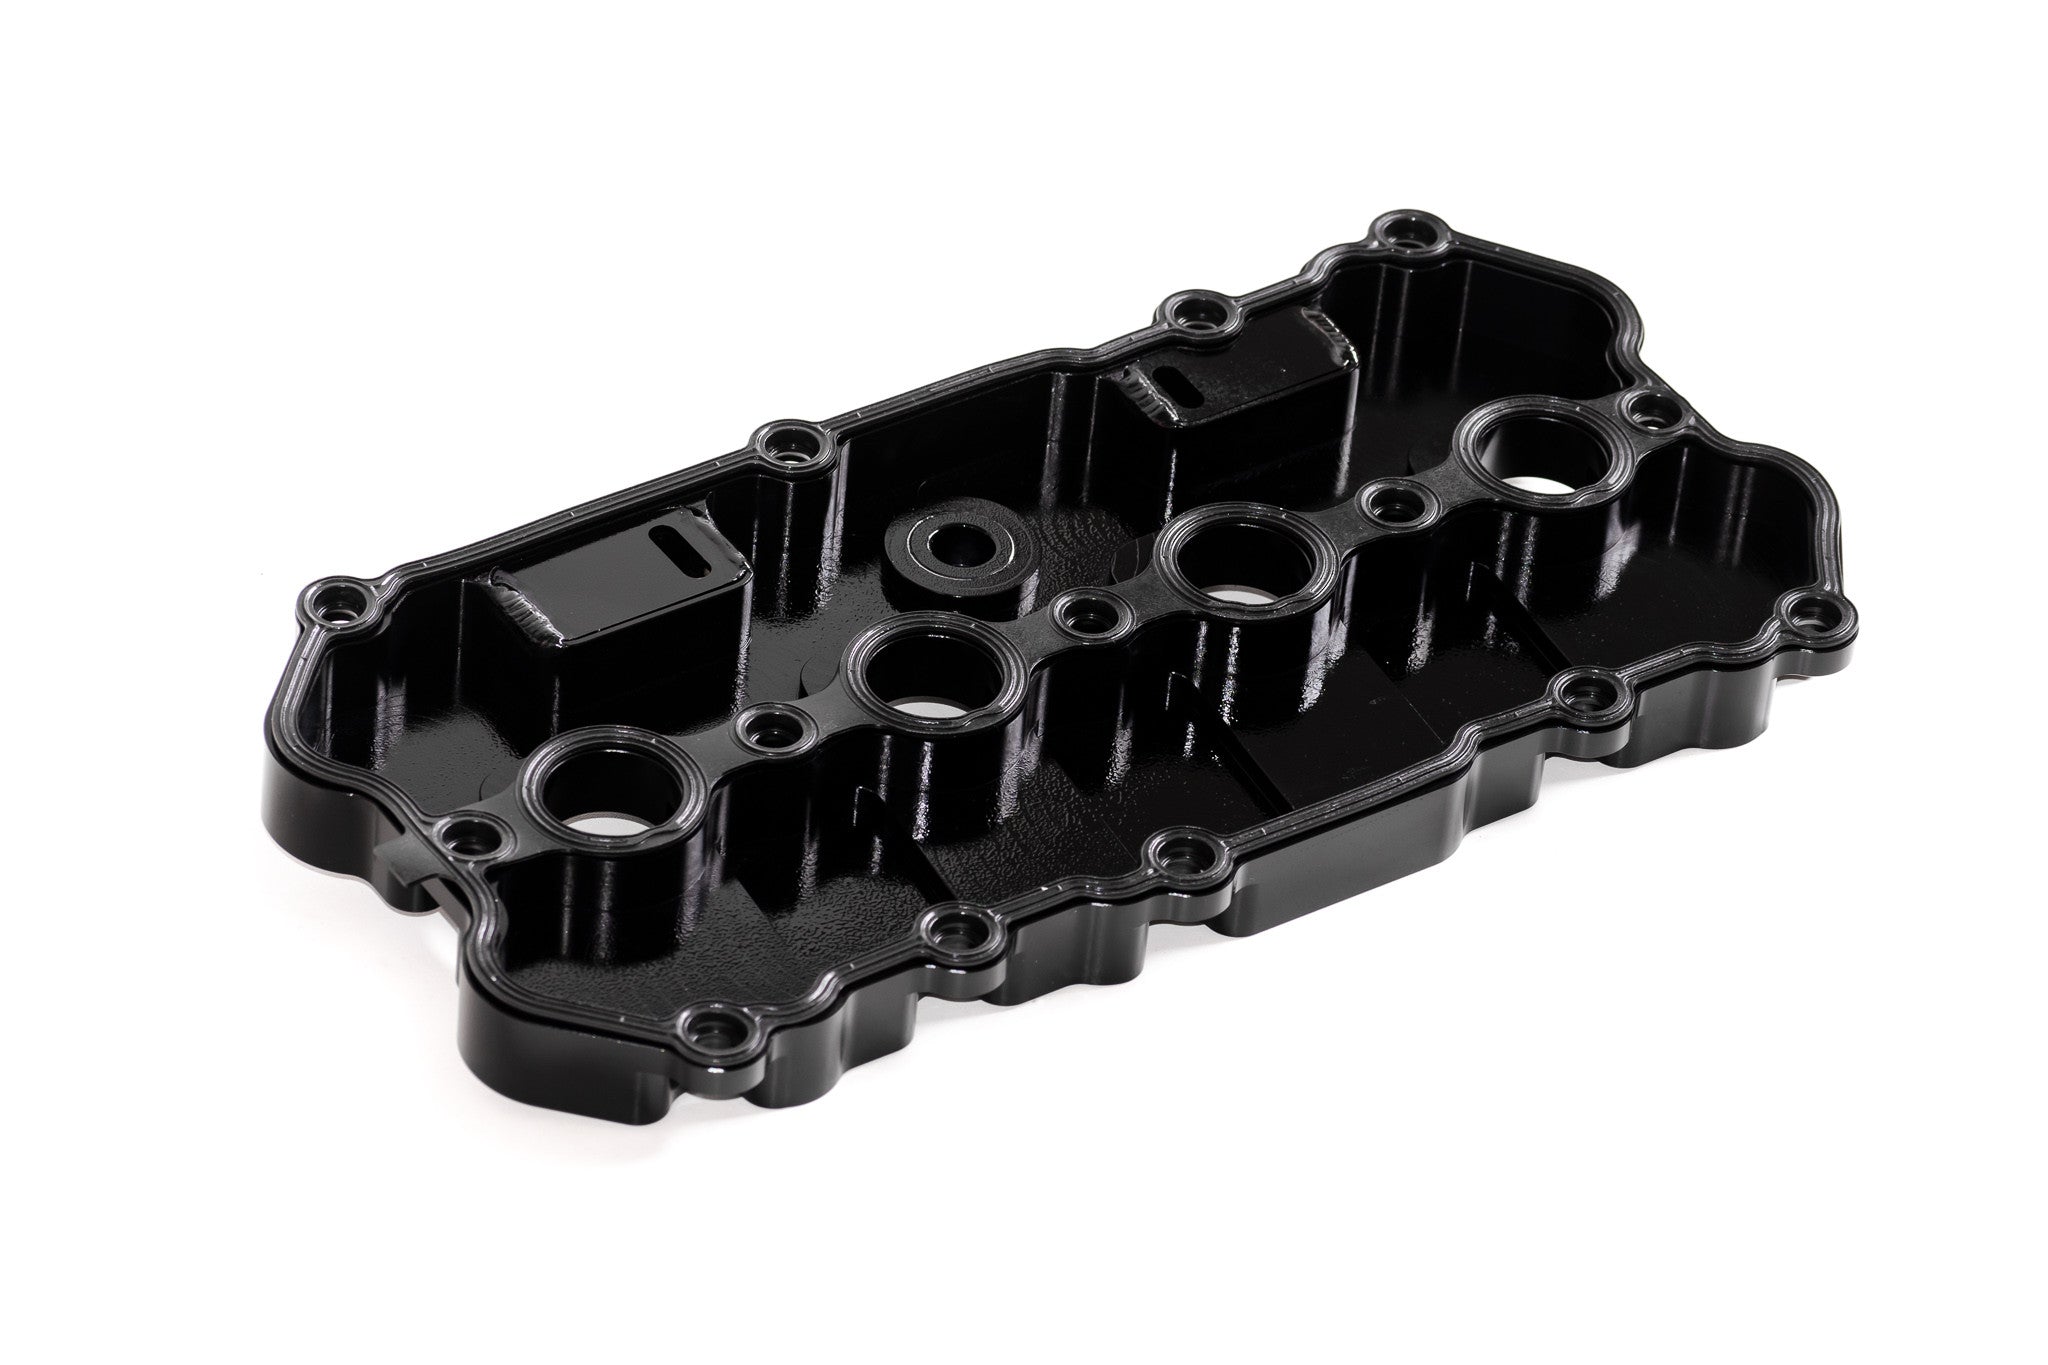 Valve Cover for EA113 2.0 TFSI Engines - RTMG Performance